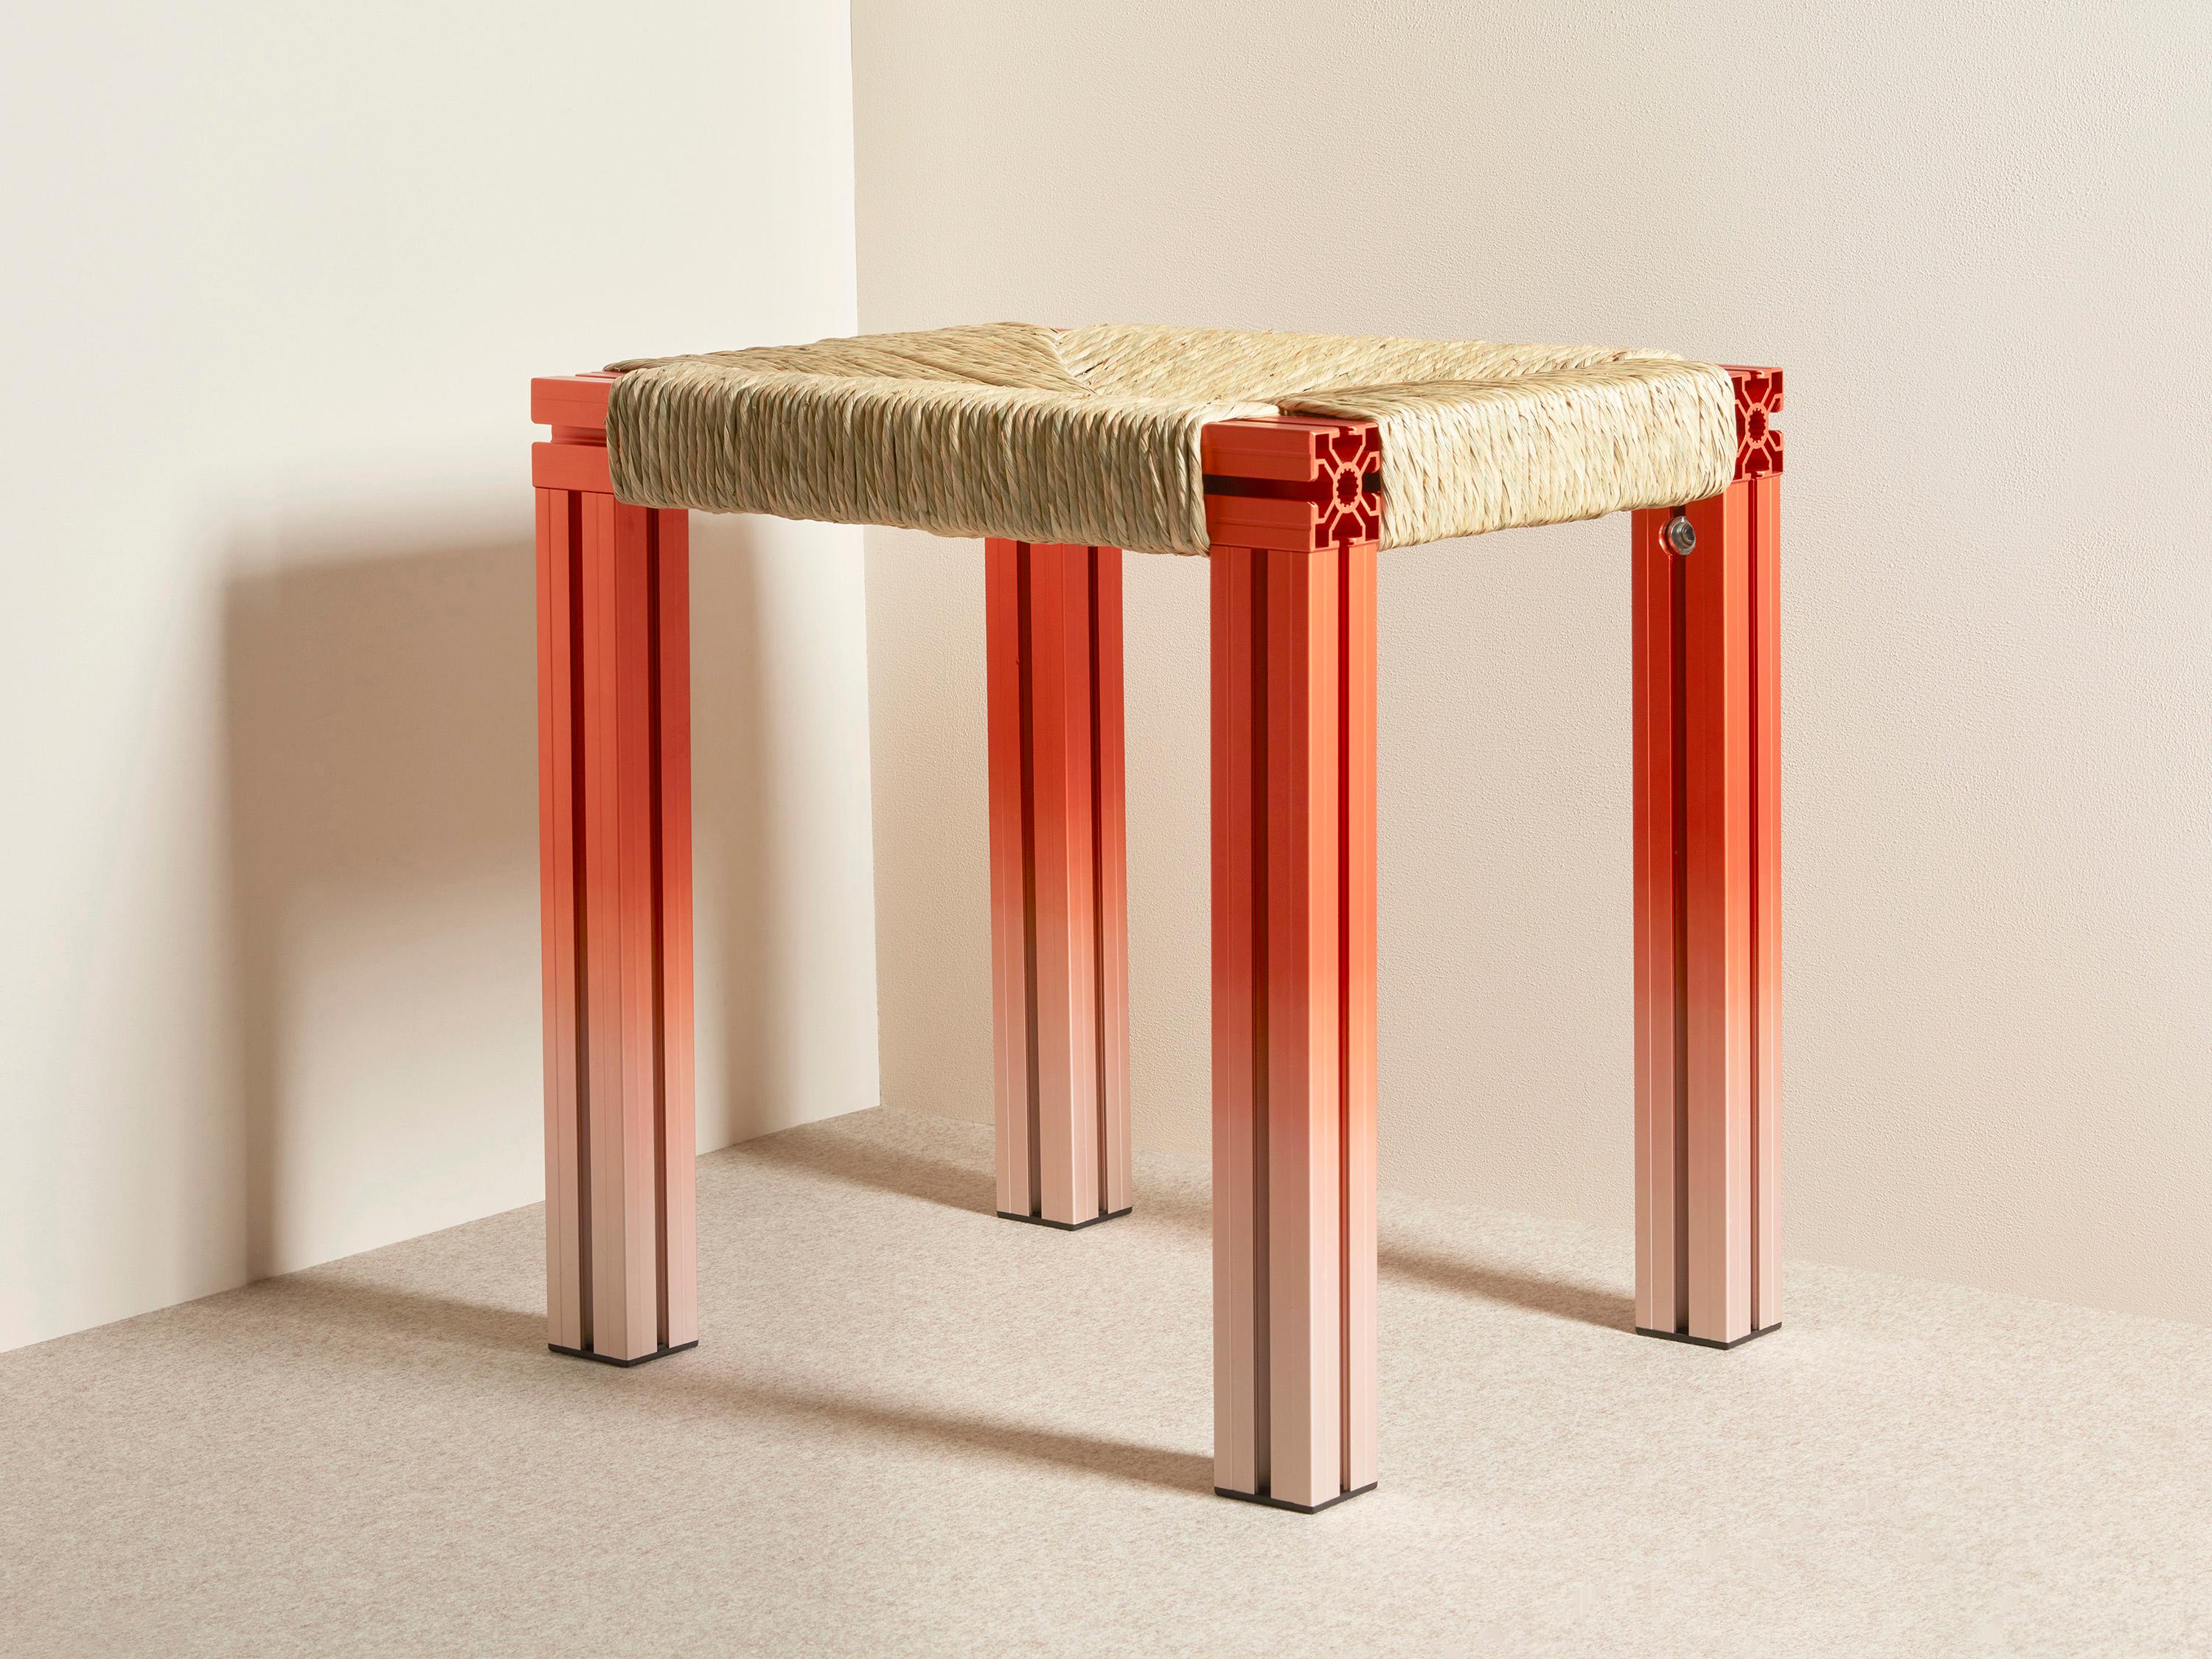 Aluminum Red Aluminium Stool with Reel Rush Seating from Anodised Wicker Collection For Sale